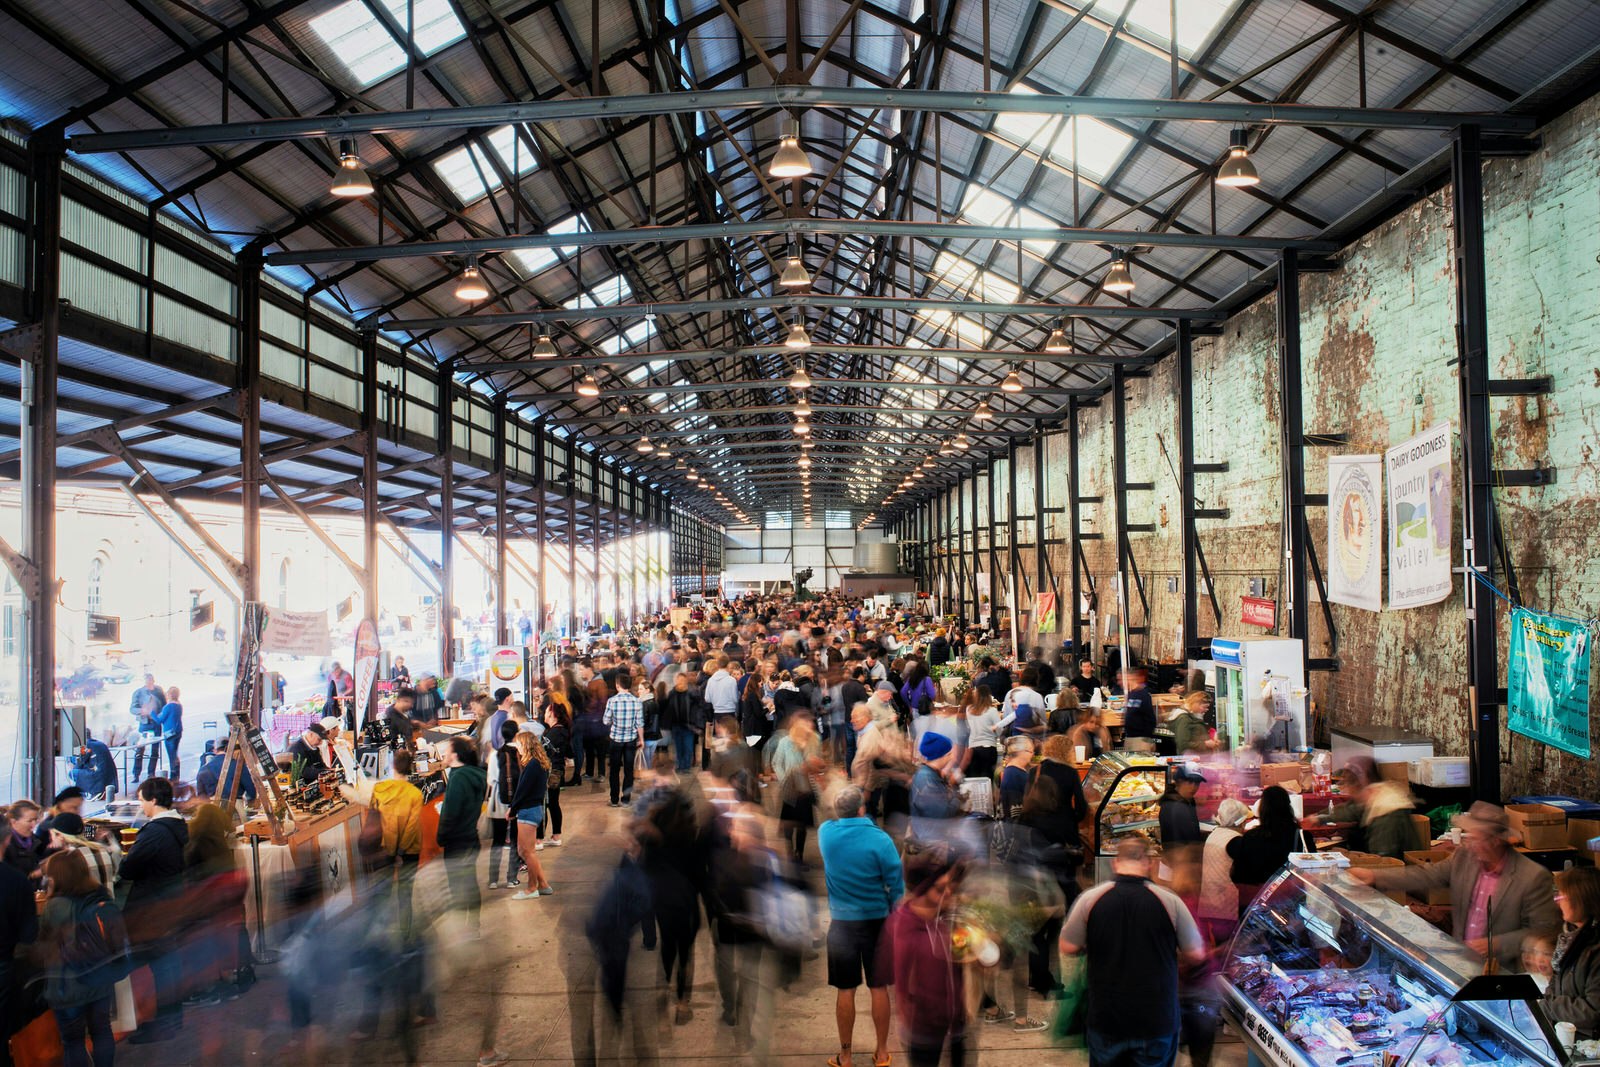 Crowds wander around the huge warehouse housing the Carriageworks Farmers Market